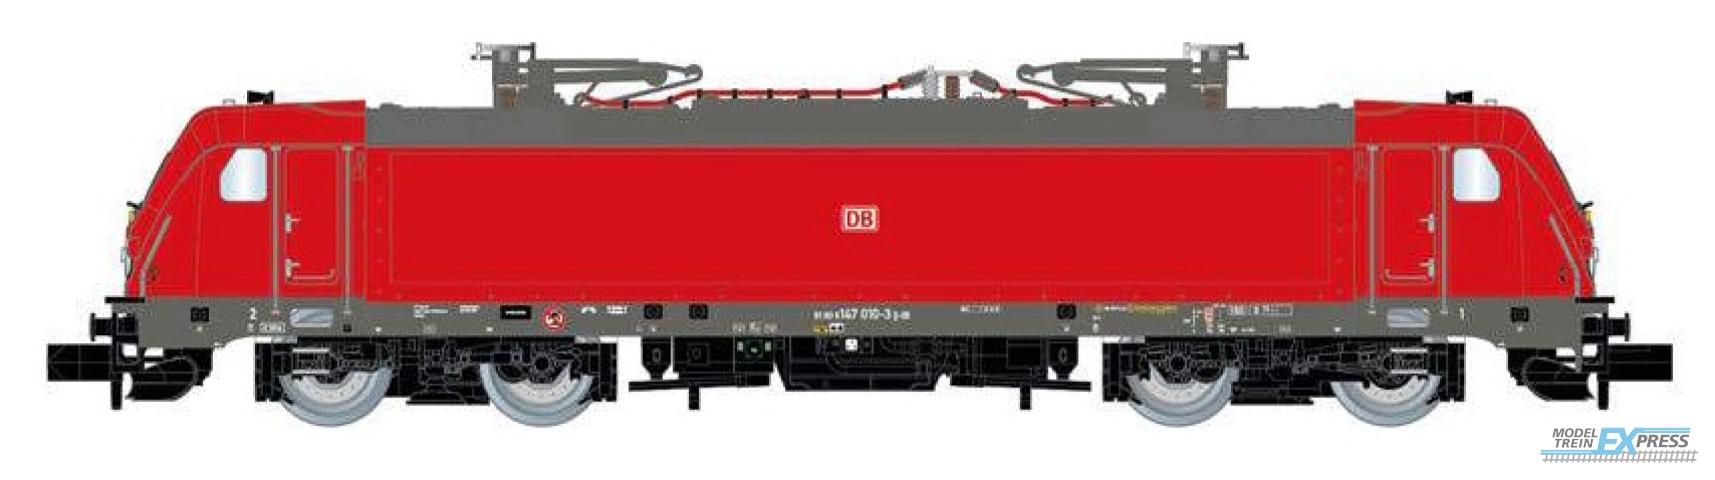 Arnold 2438D DB AG, elctric locomotive class 147, traffic red livery, DB Regio, period VI, with DCC decoder